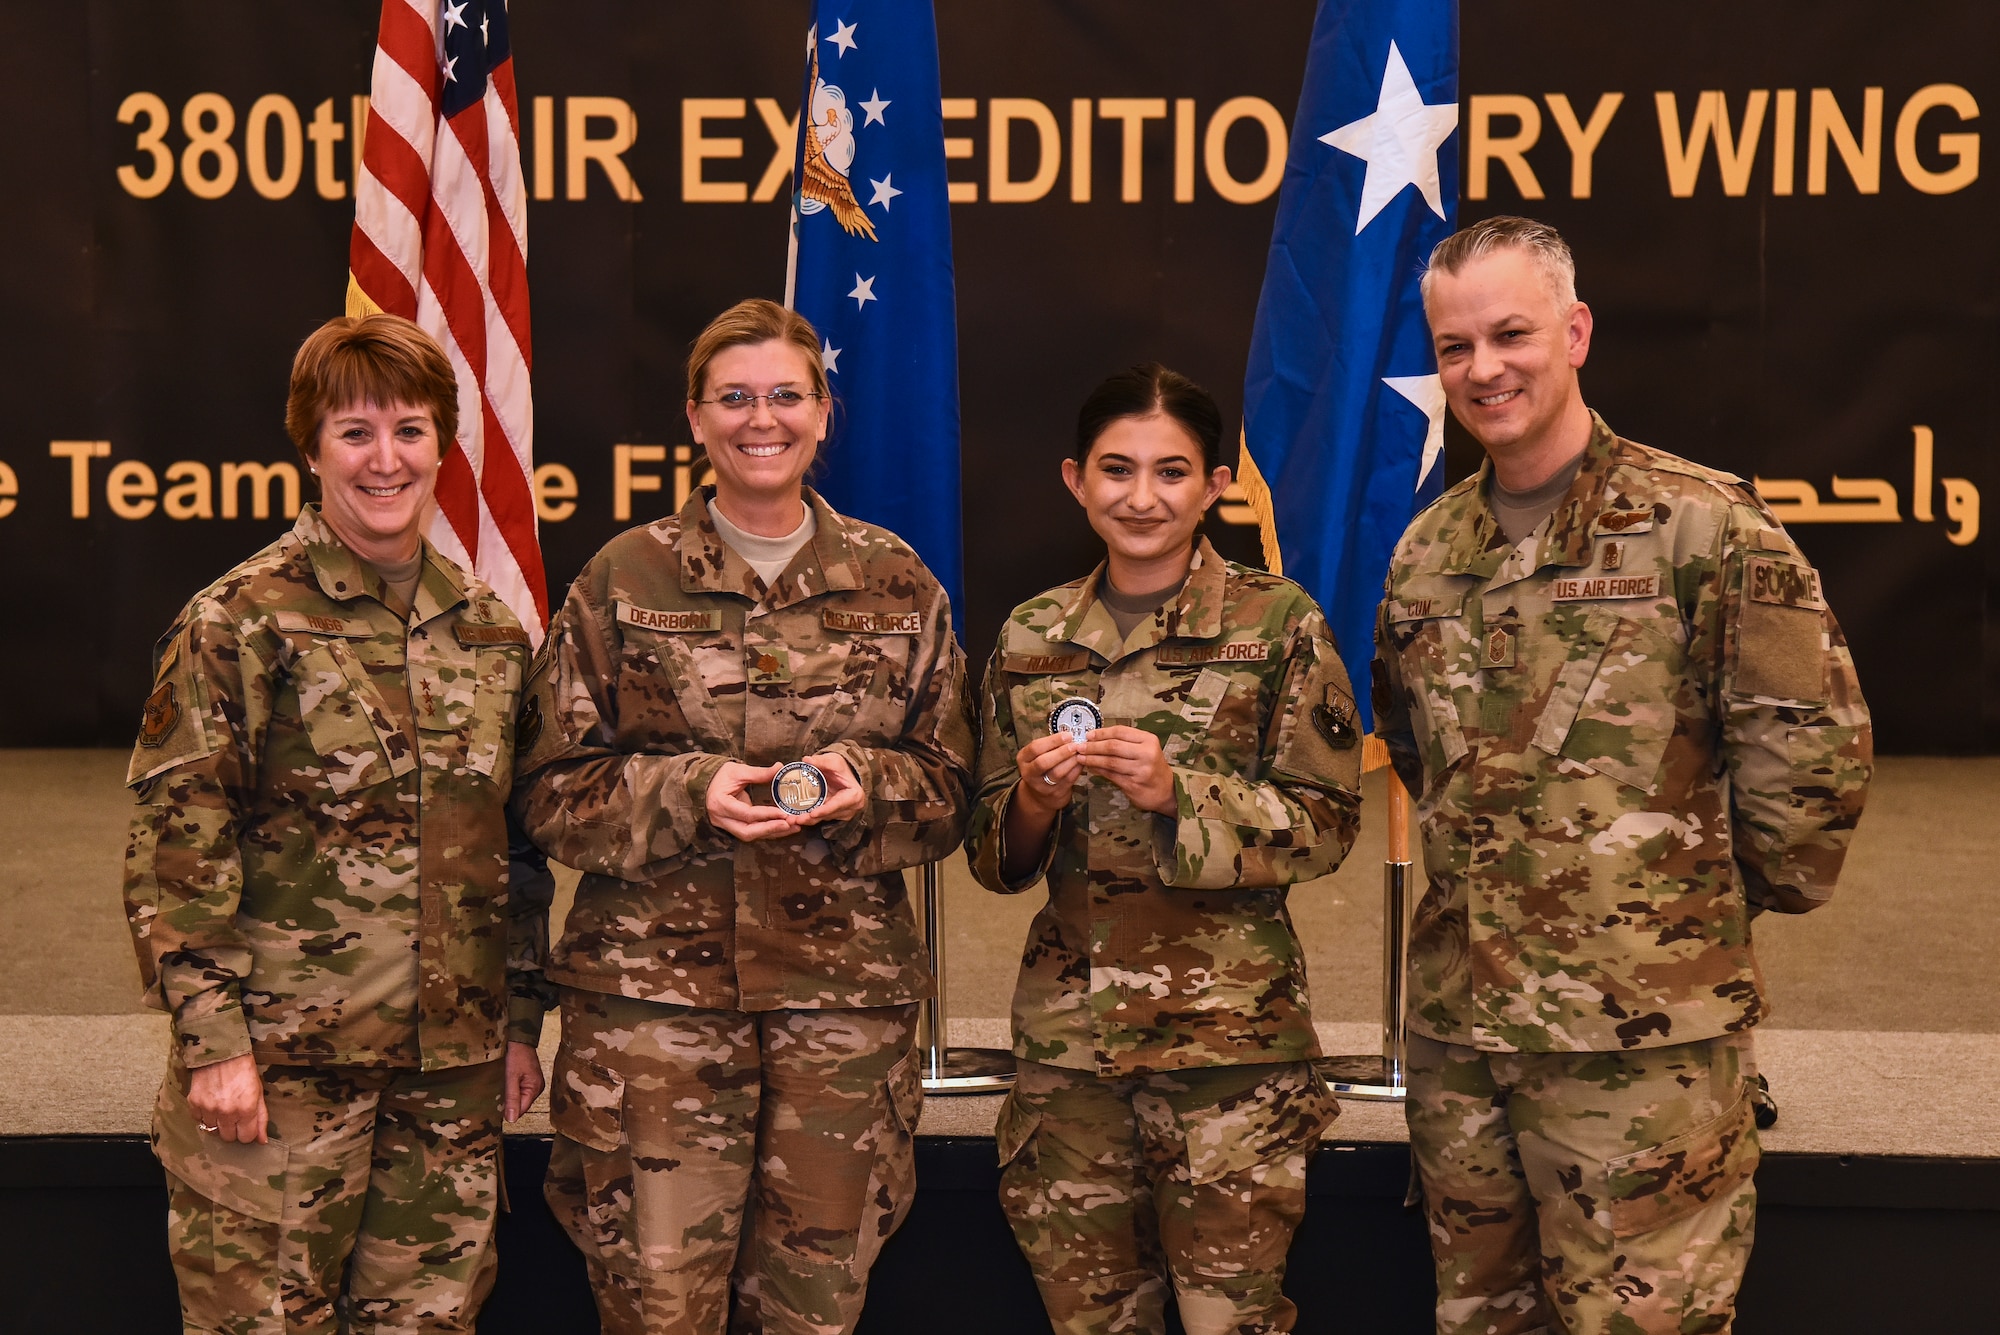 U.S. Air Force Lt. Gen. Dorothy Hogg, AF Surgeon General, and Chief Master Sgt. Steven Cum, Chief of Medical Enlisted Force and Enlisted Corps Chief, pose with two Airmen from the 380th Expeditionary Medical Group during an all-call at Al Dhafra Air Base, United Arab Emirates, Nov. 11, 2018. The Airmen were coined because of their outstanding performance and contribution to the 380th Air Expeditonary Wing mission. (U.S. Air Force photo by Senior Airman Mya M. Crosby)